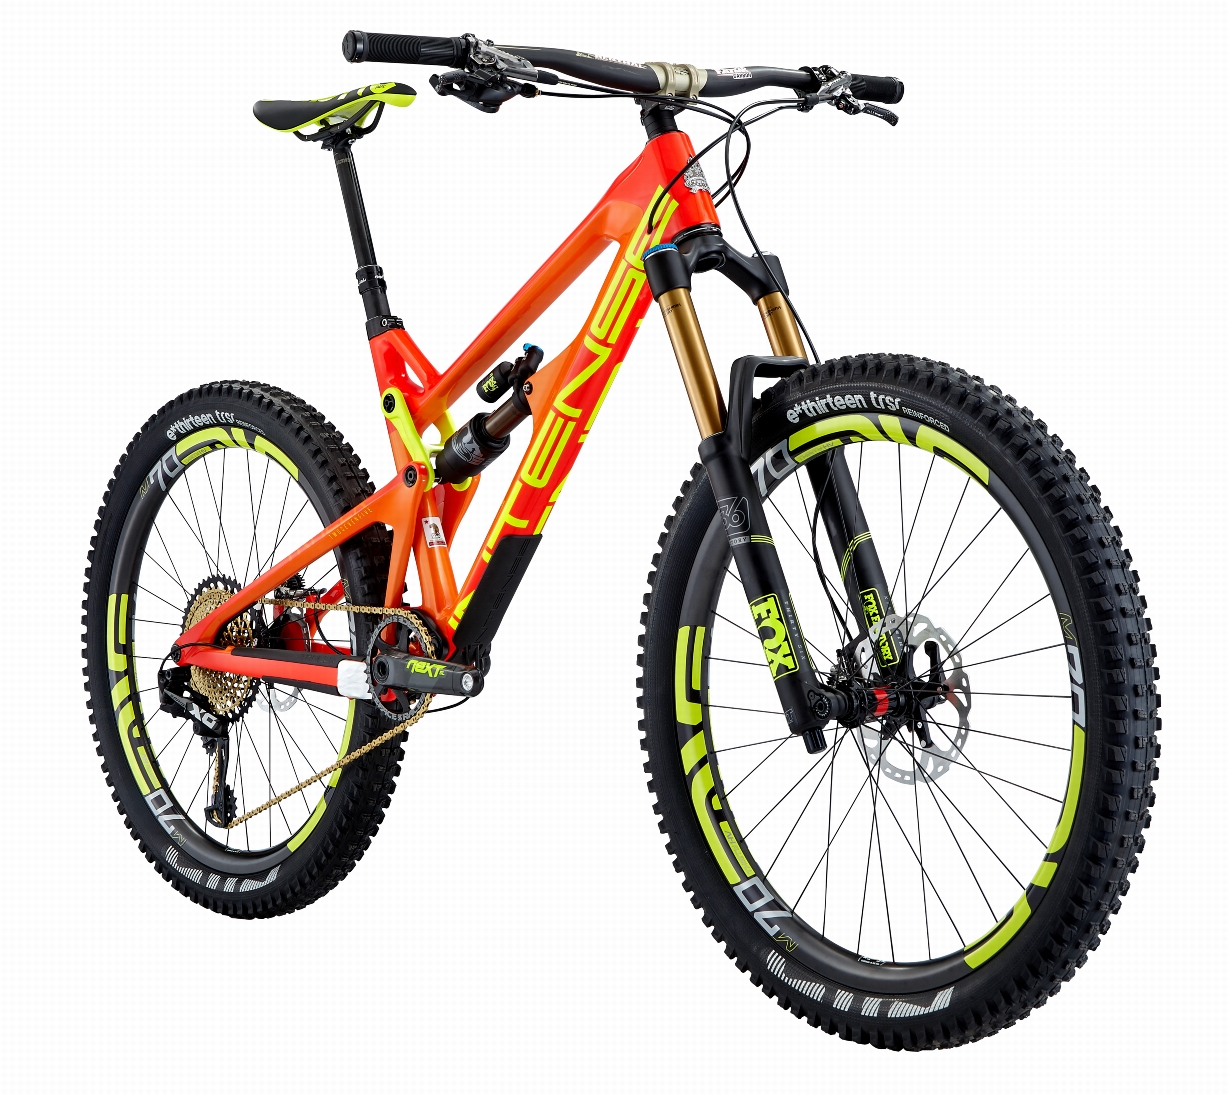 Tracer SL Frame only – Red/Orange – with X2 = $4900.00